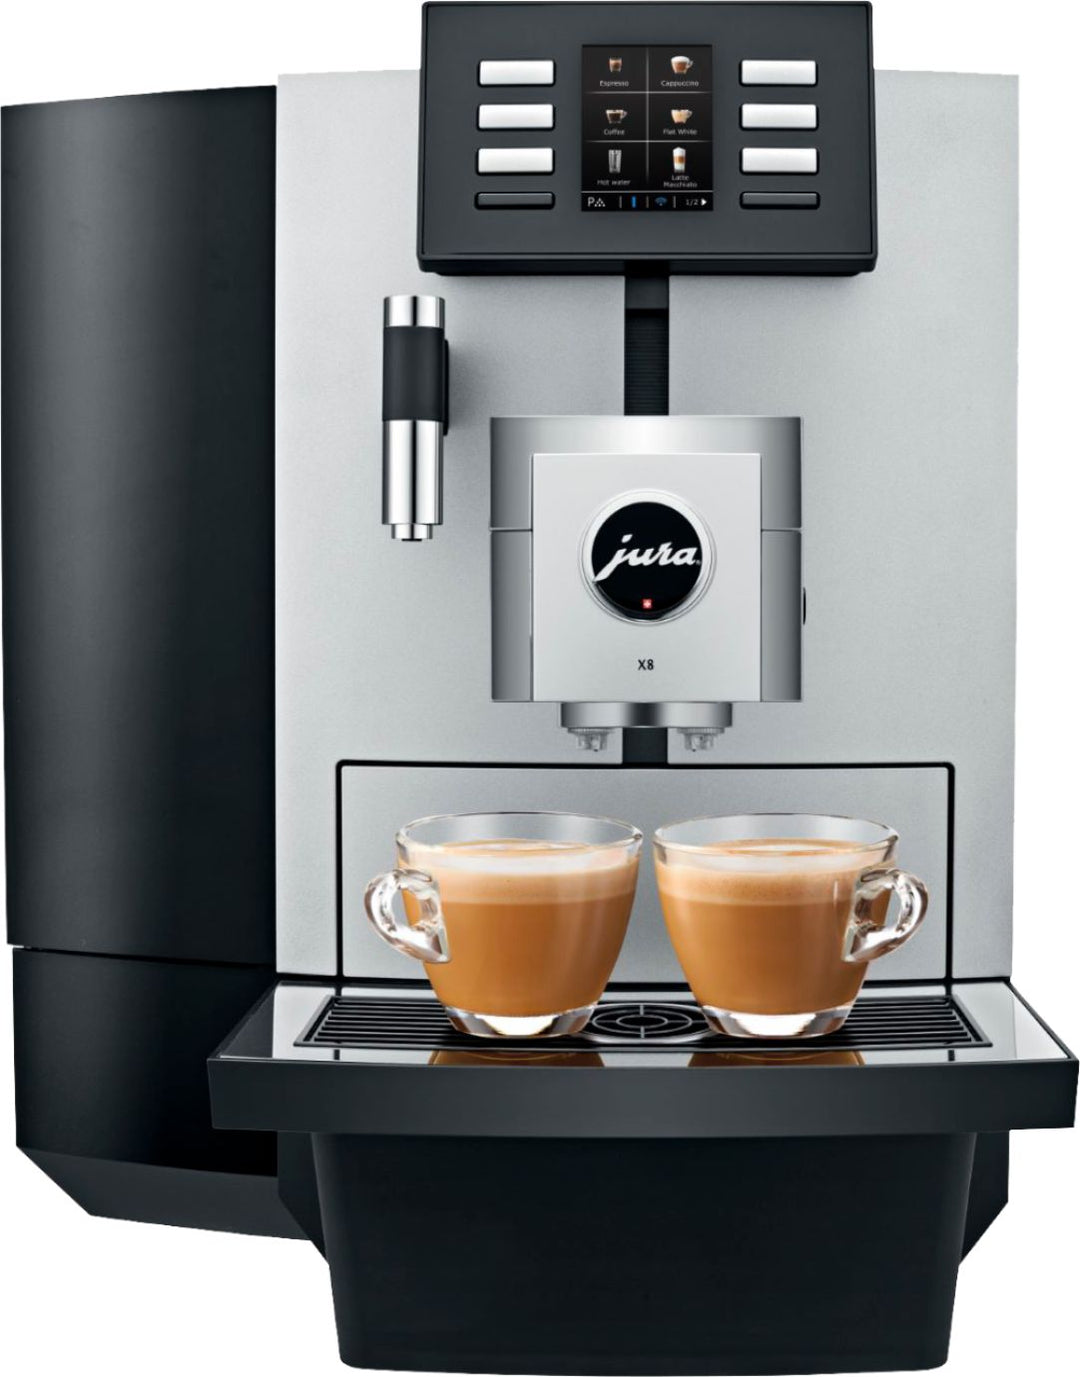 Jura - X8 Espresso Machine with 15 bars of pressure and intergrated grinder - Black and Chrome_1